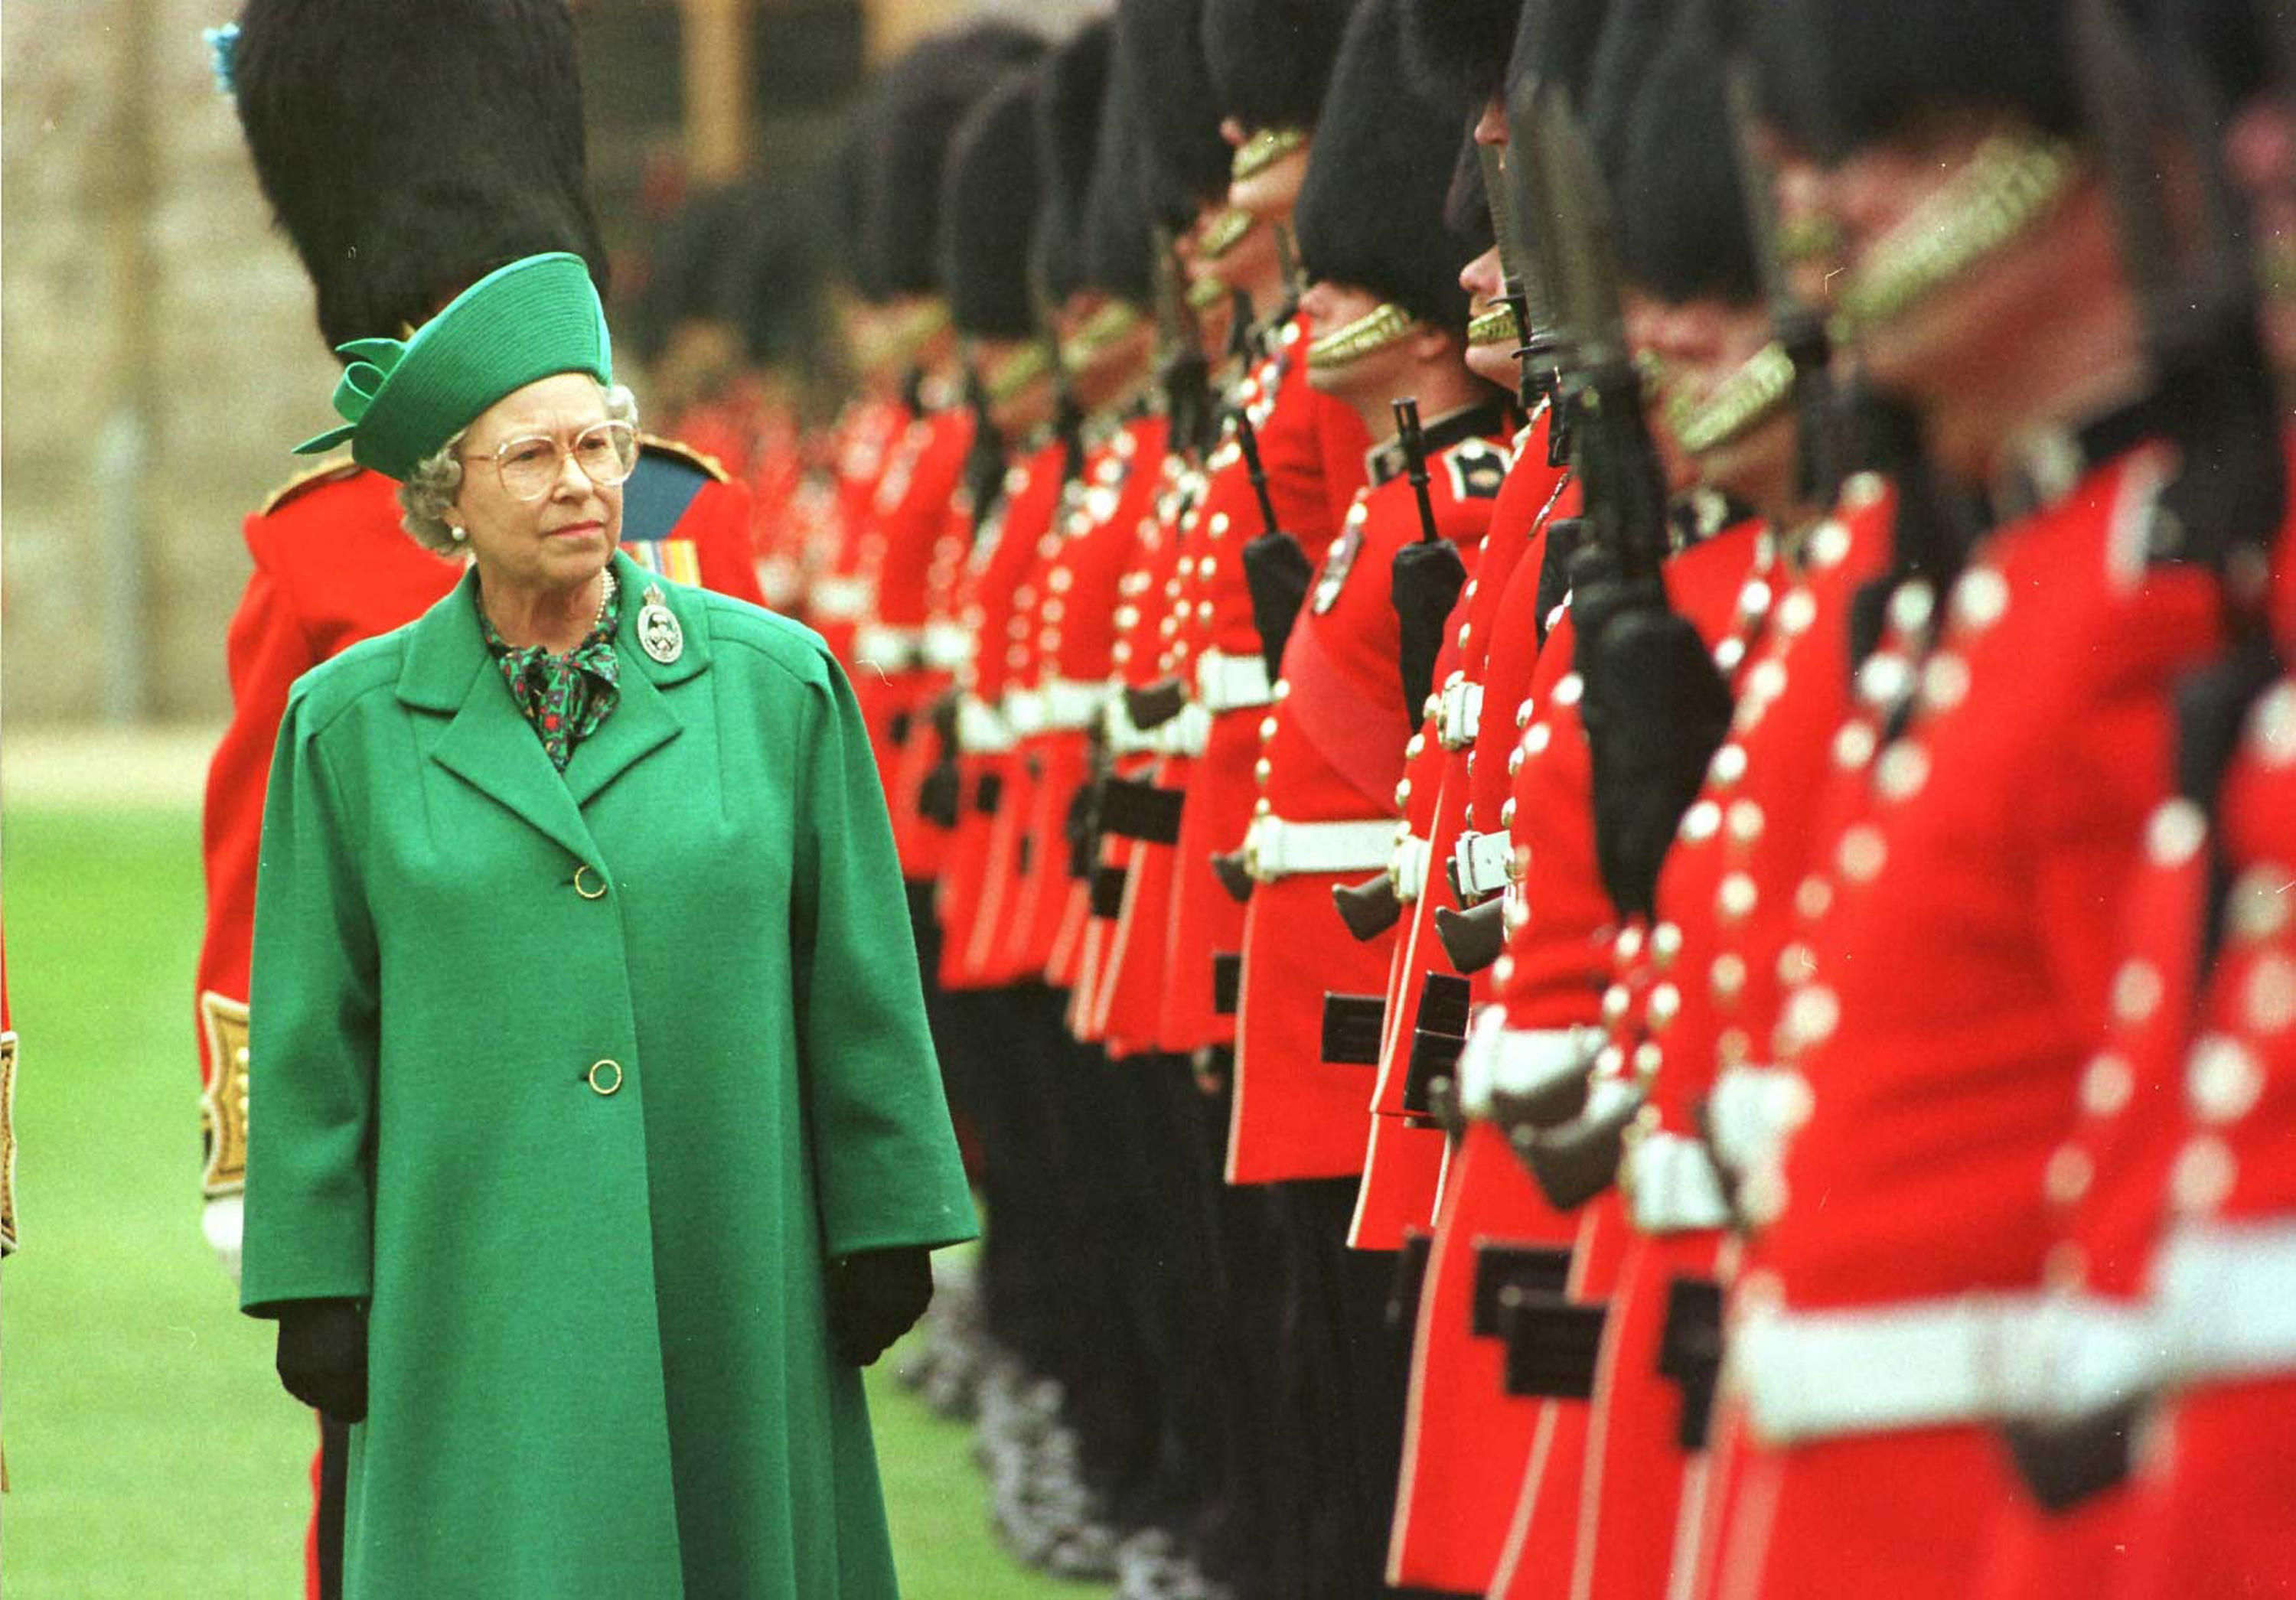 The Queen at Windsor Castle inspects the Guard of the 1st Battalion of the Irish Guards